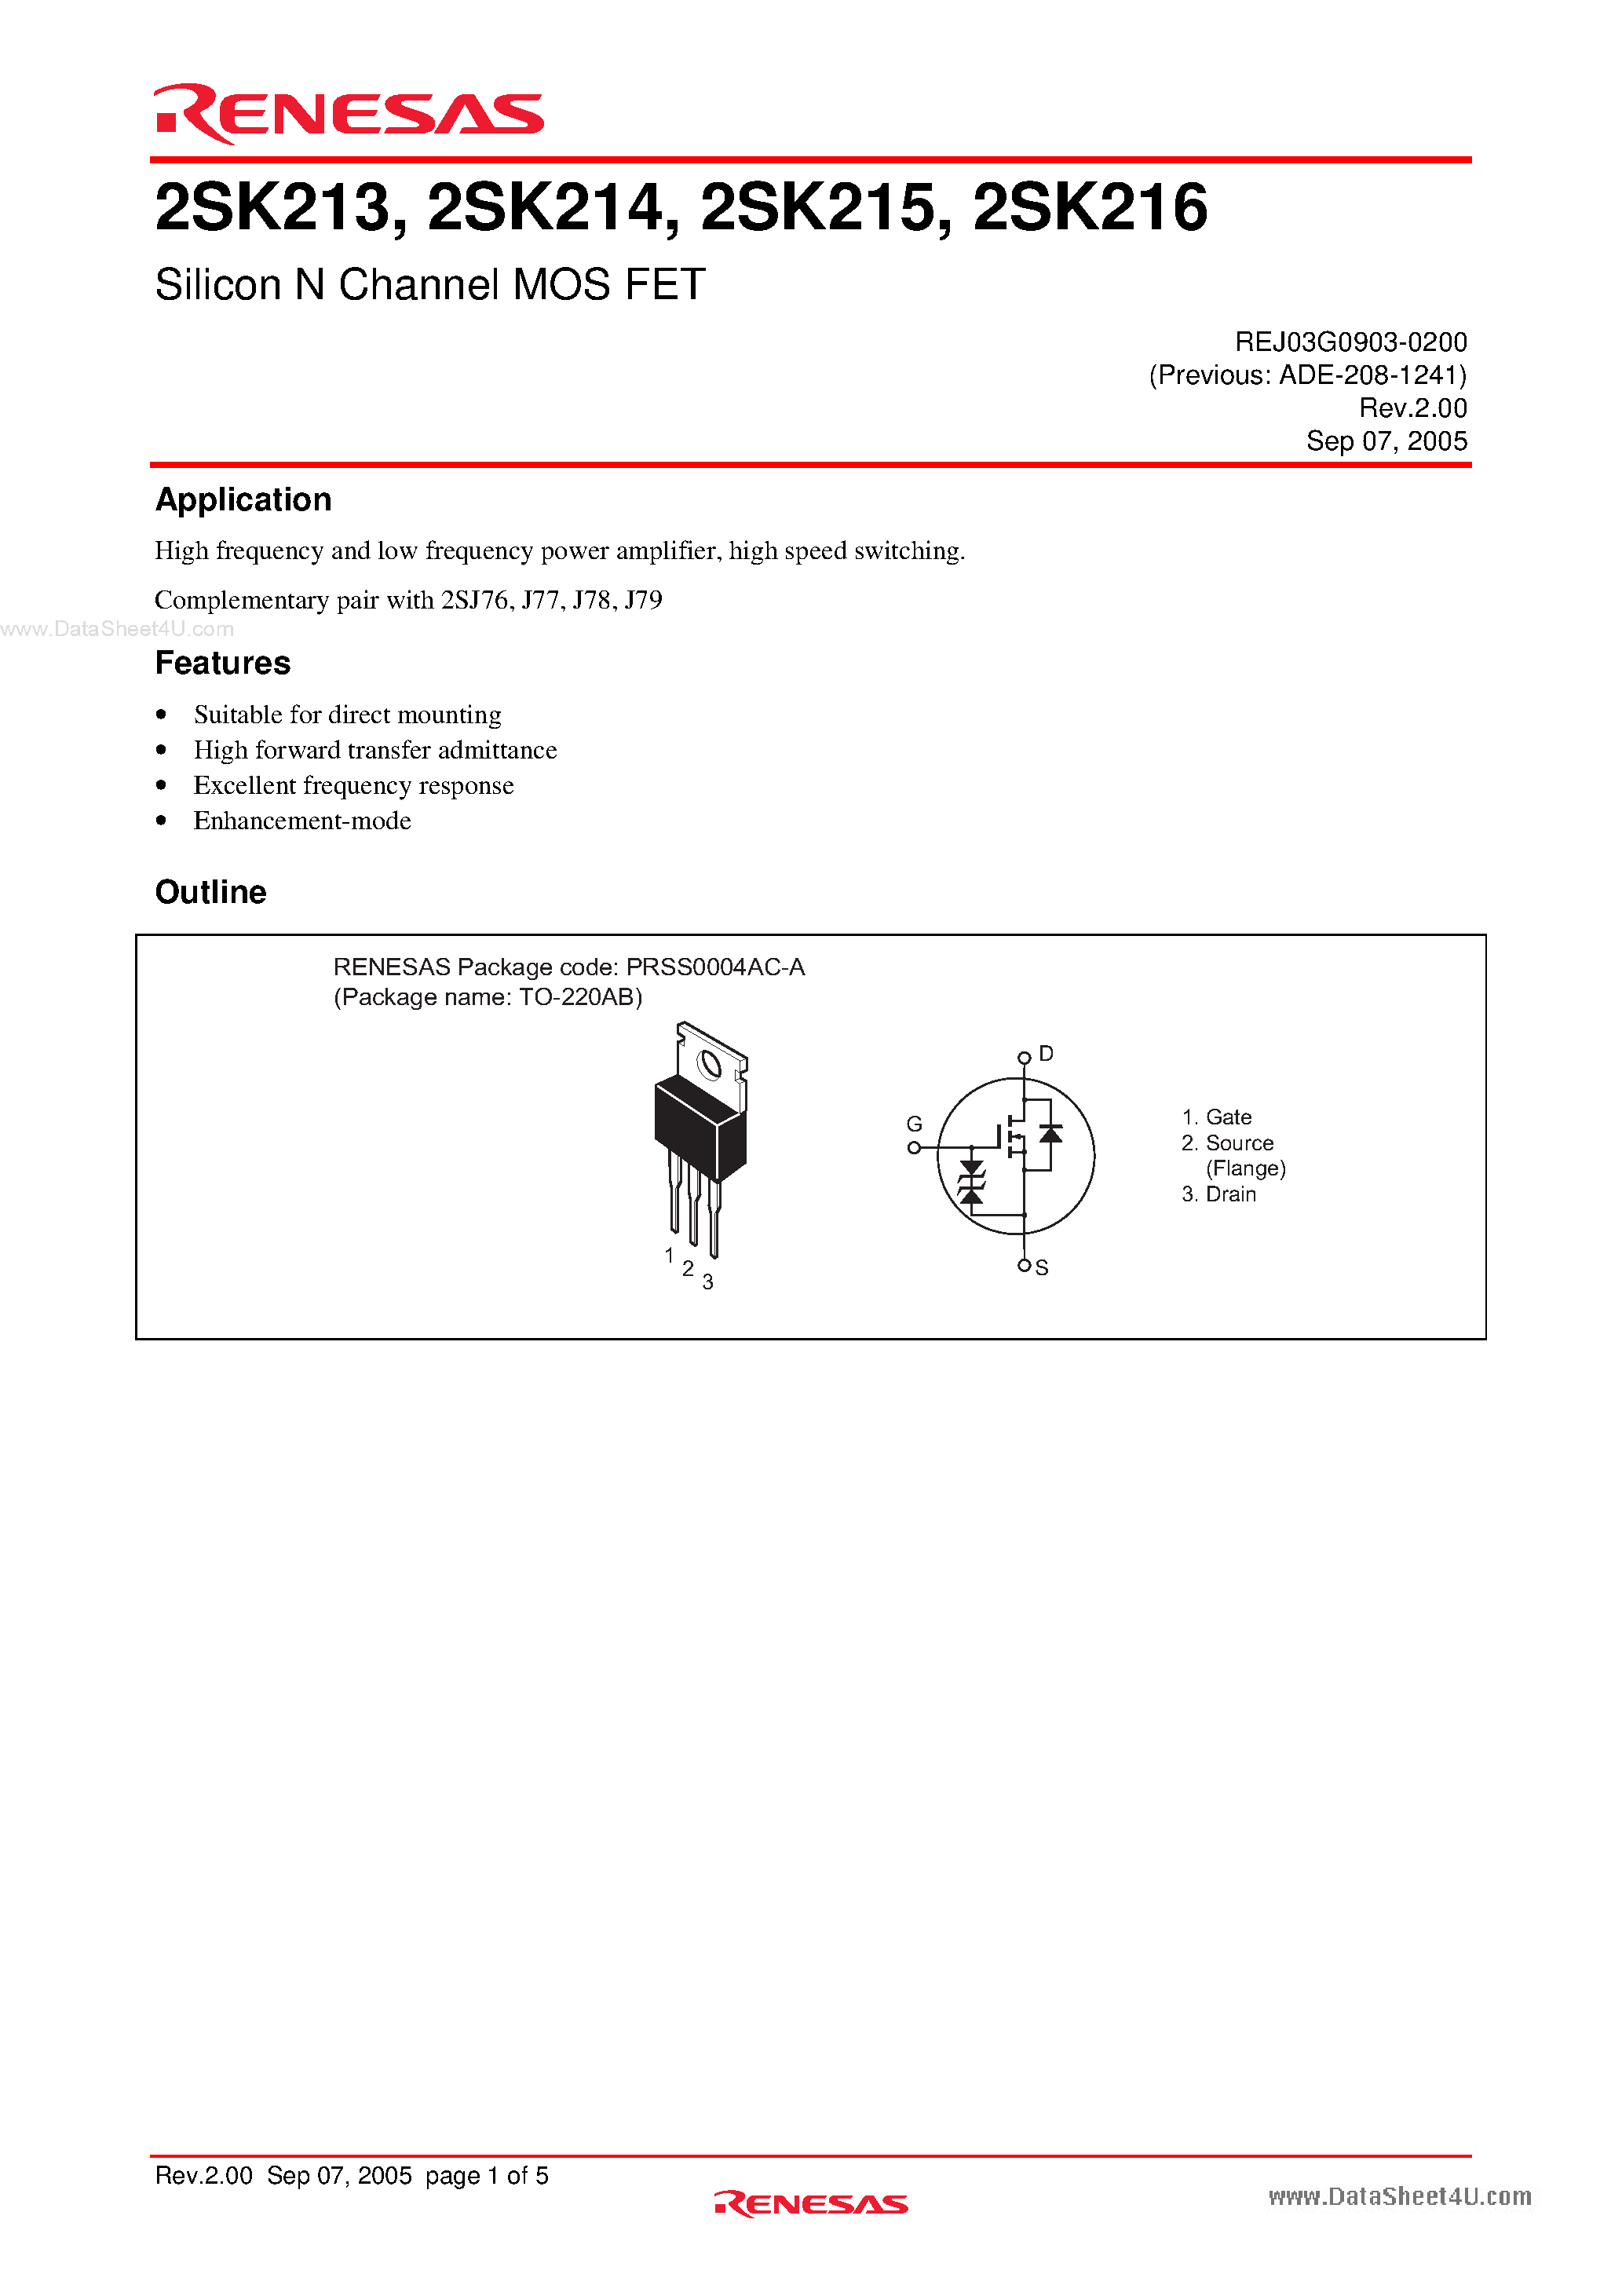 Datasheet 2SK213 - (2SK213 - 2SK216) Silicon N Channel MOS FET page 1